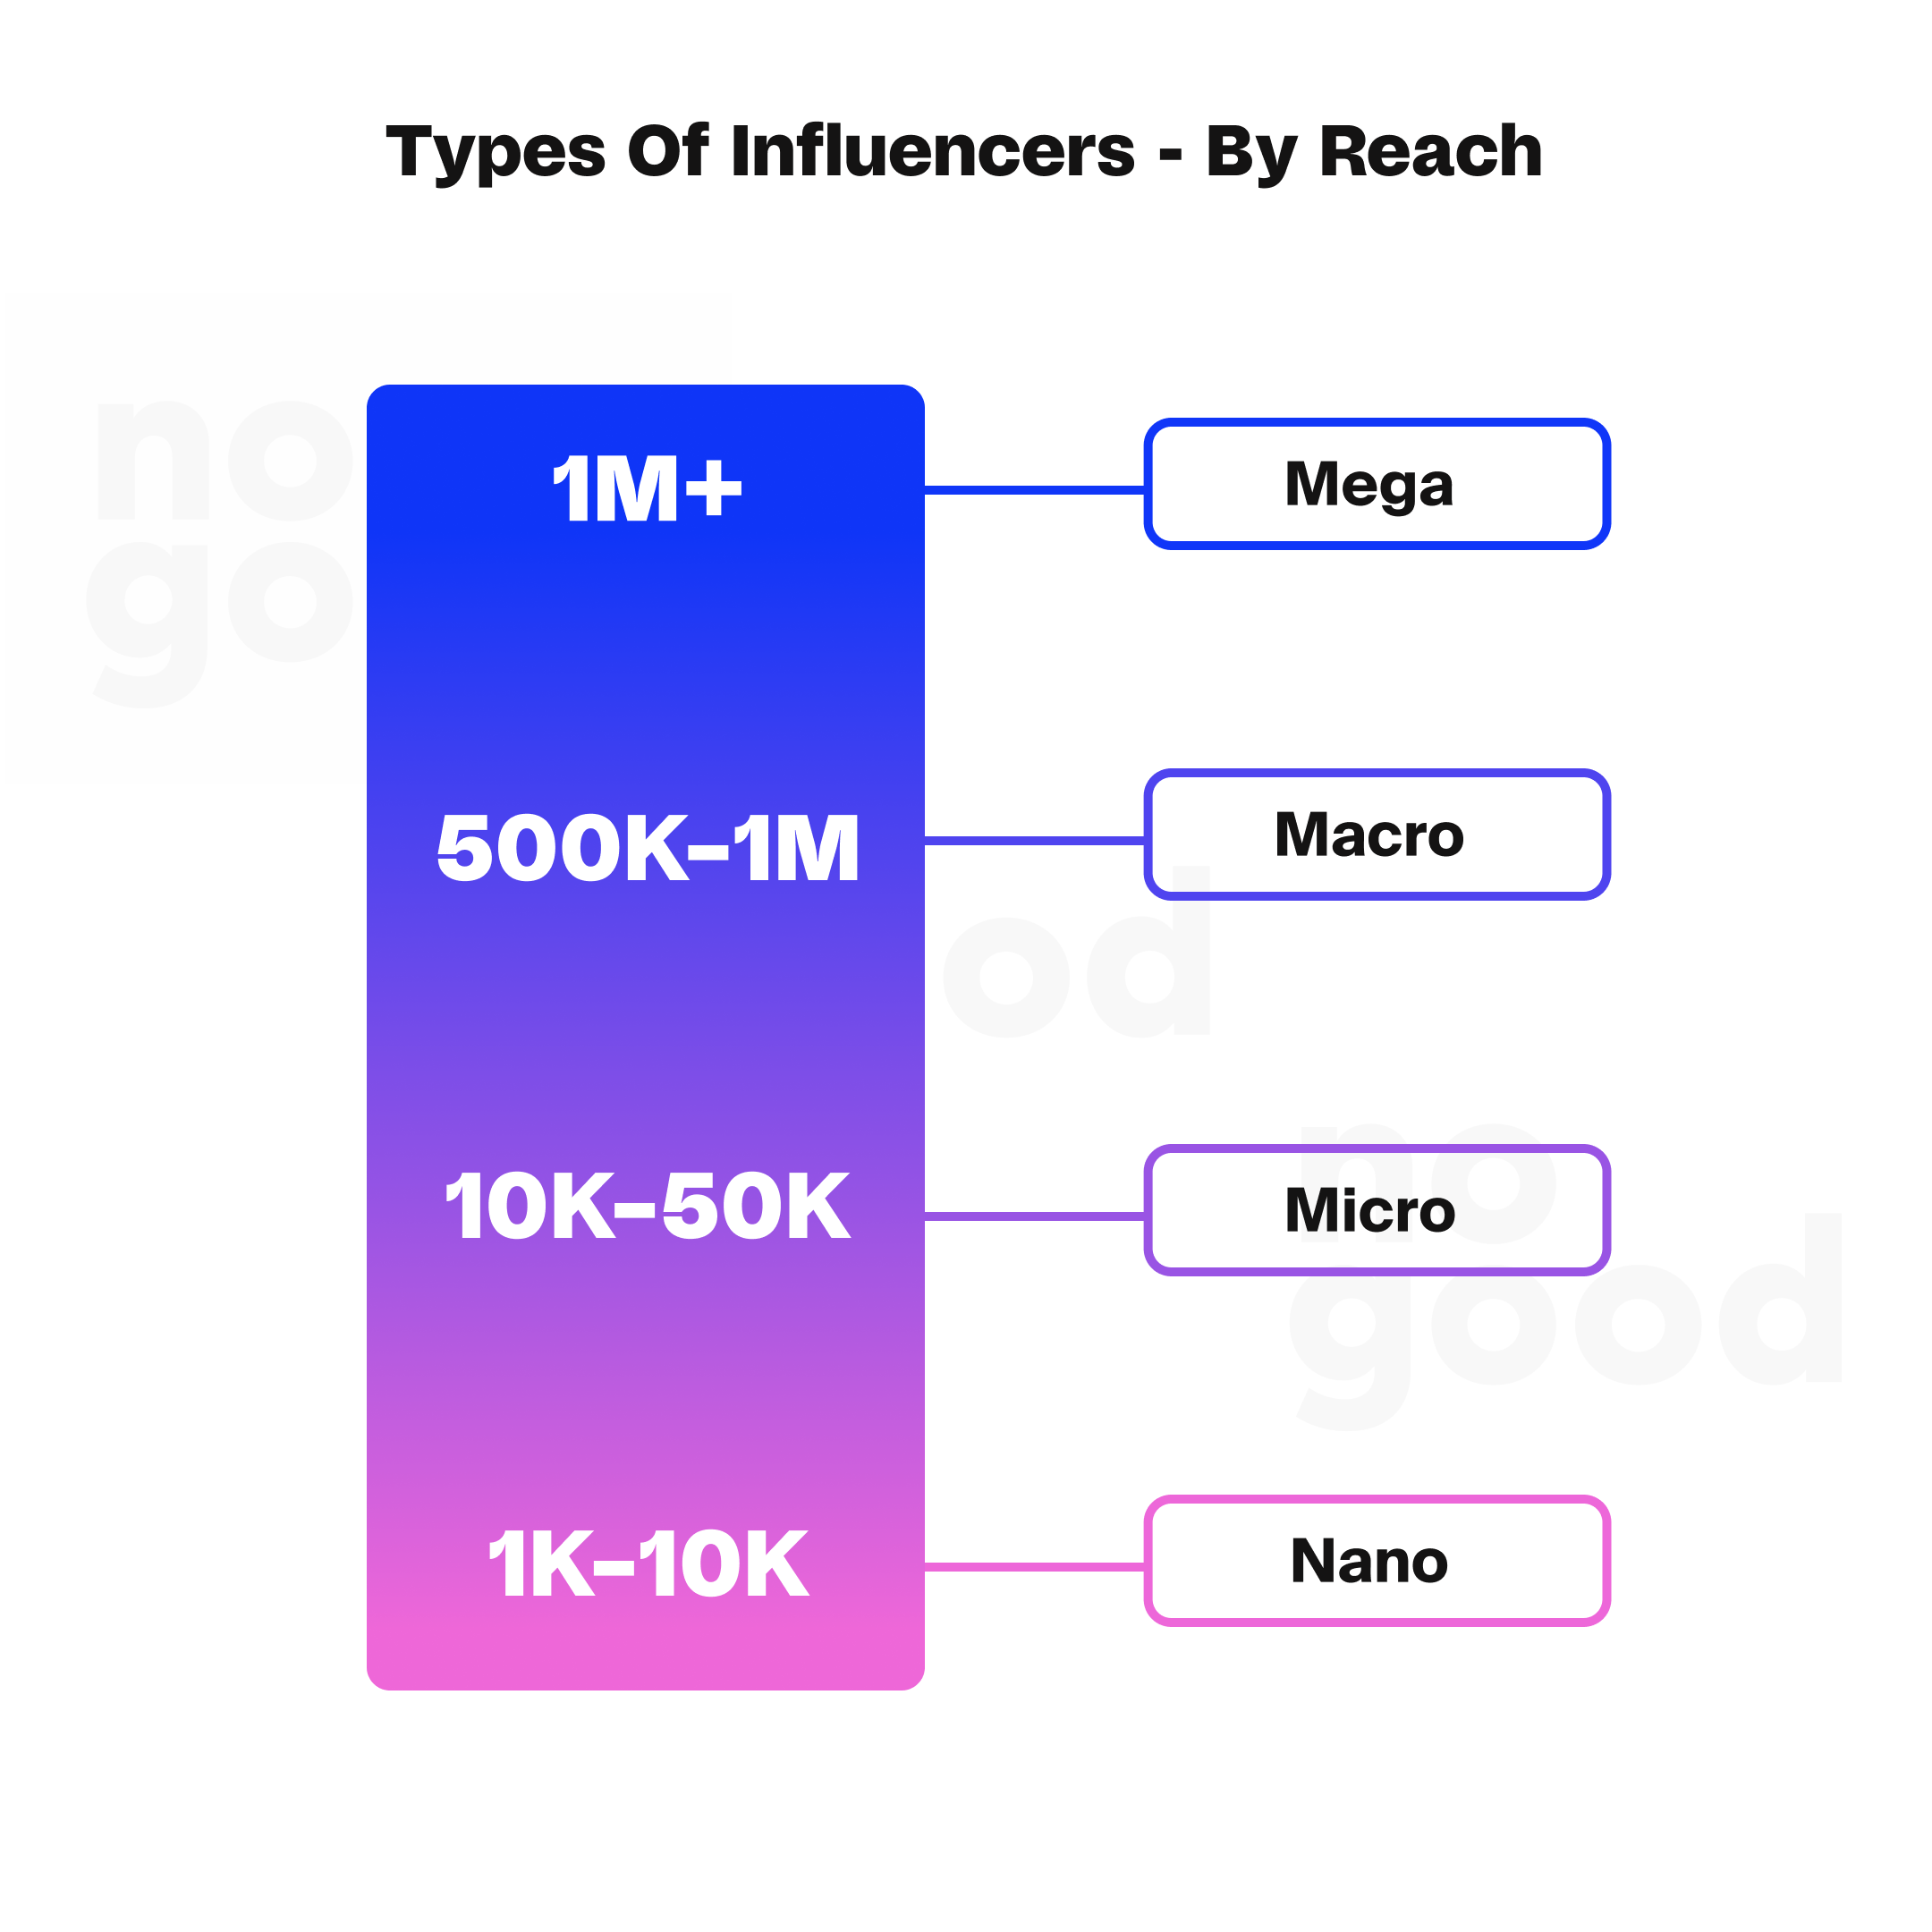 Different types of influencers according to reach.